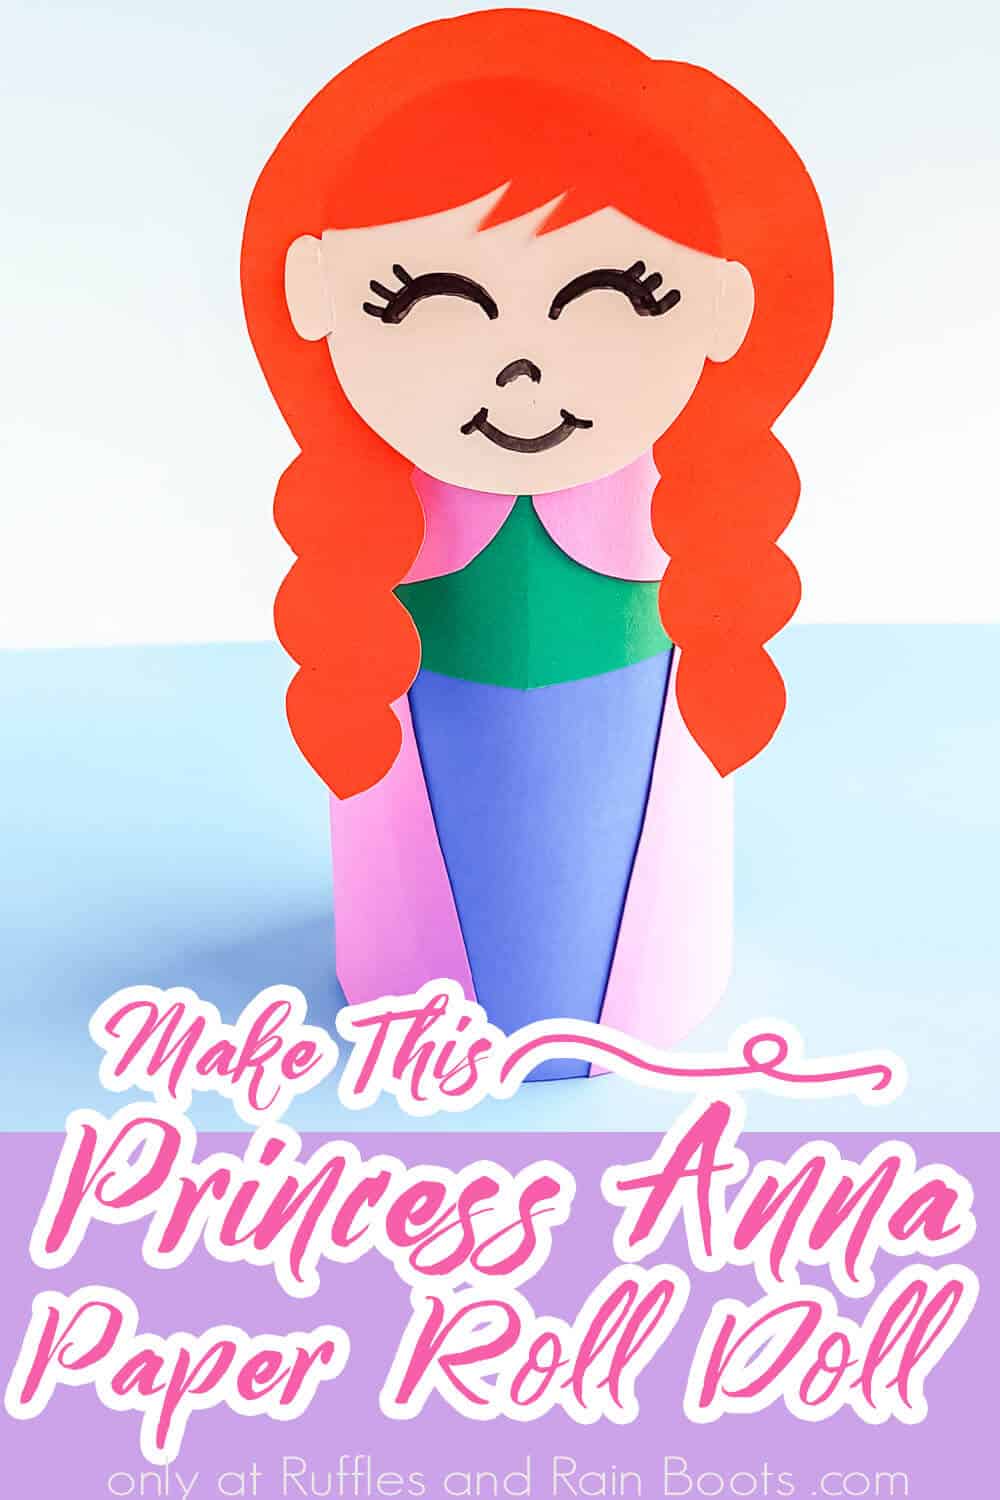 frozen anna paper craft for kids with text which reads make this princess anna paper roll doll